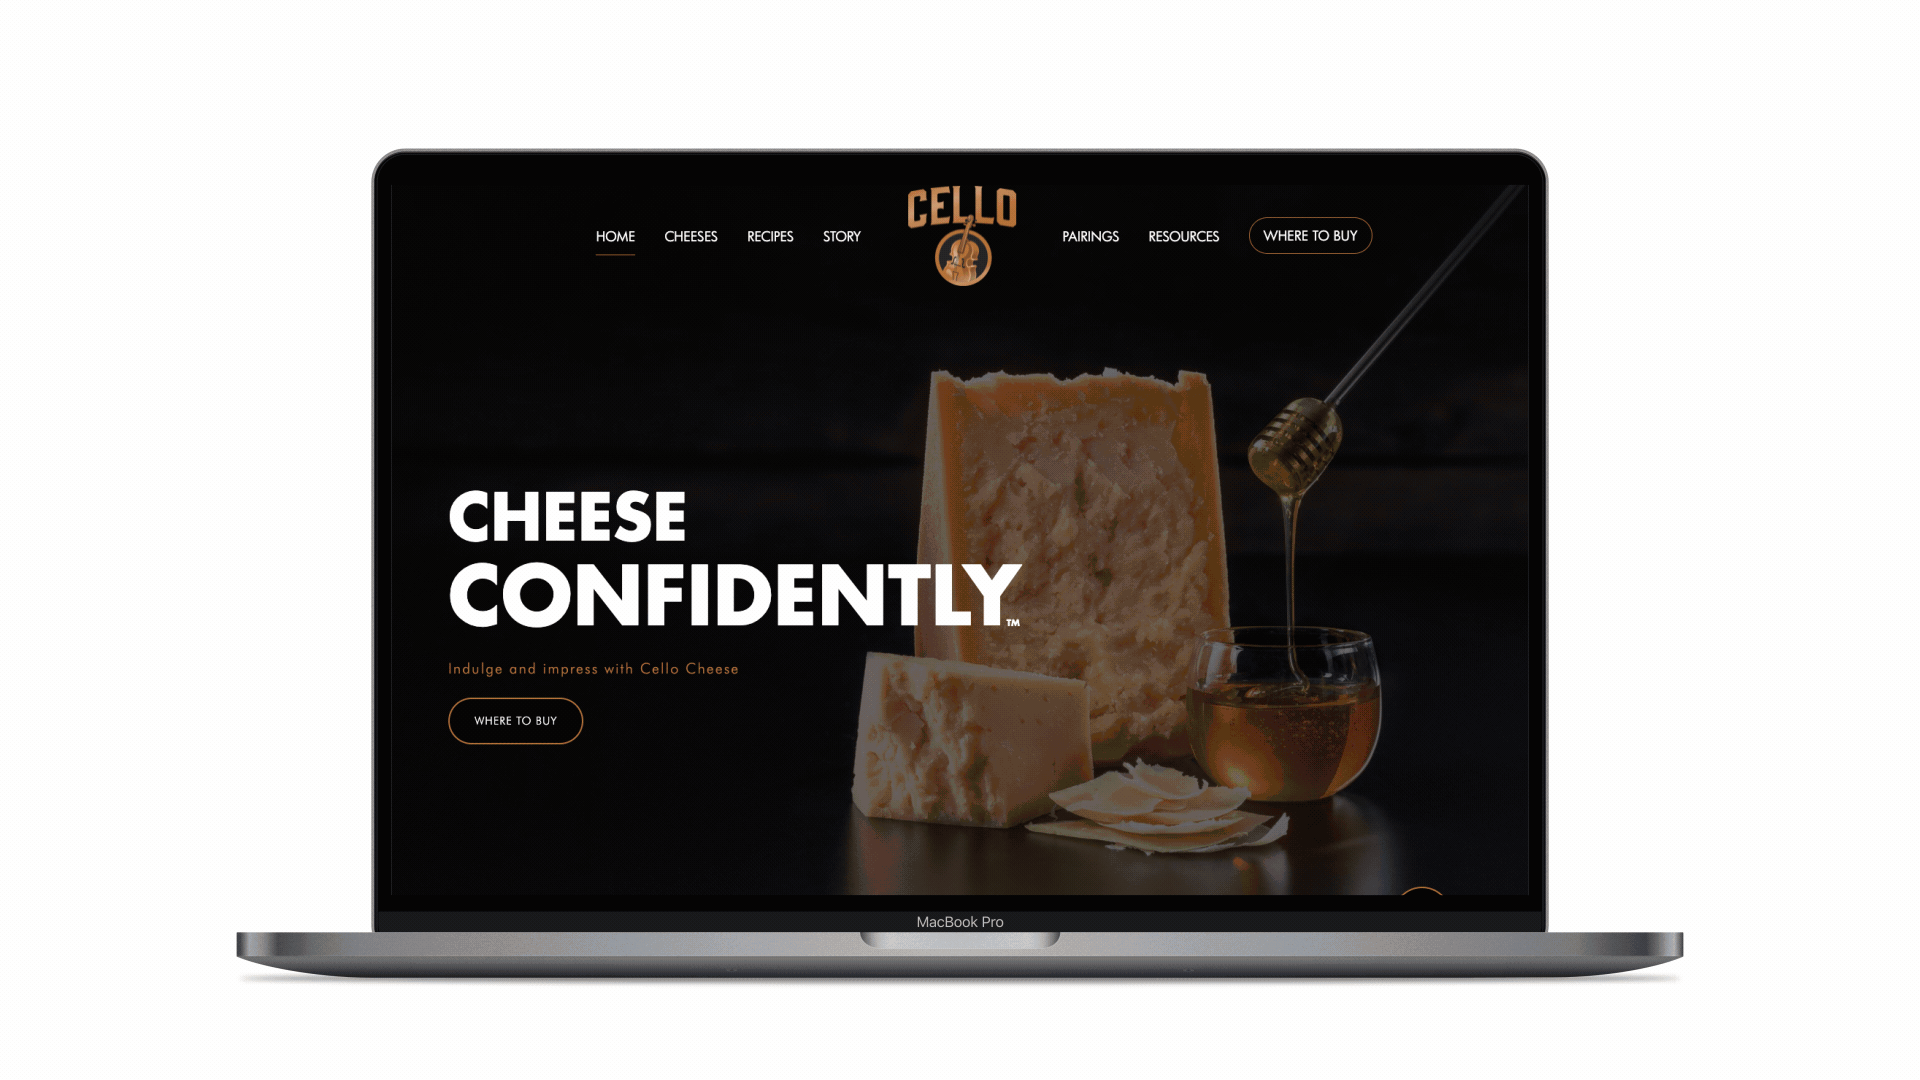 Animation scrolling through the Cello Cheese website.